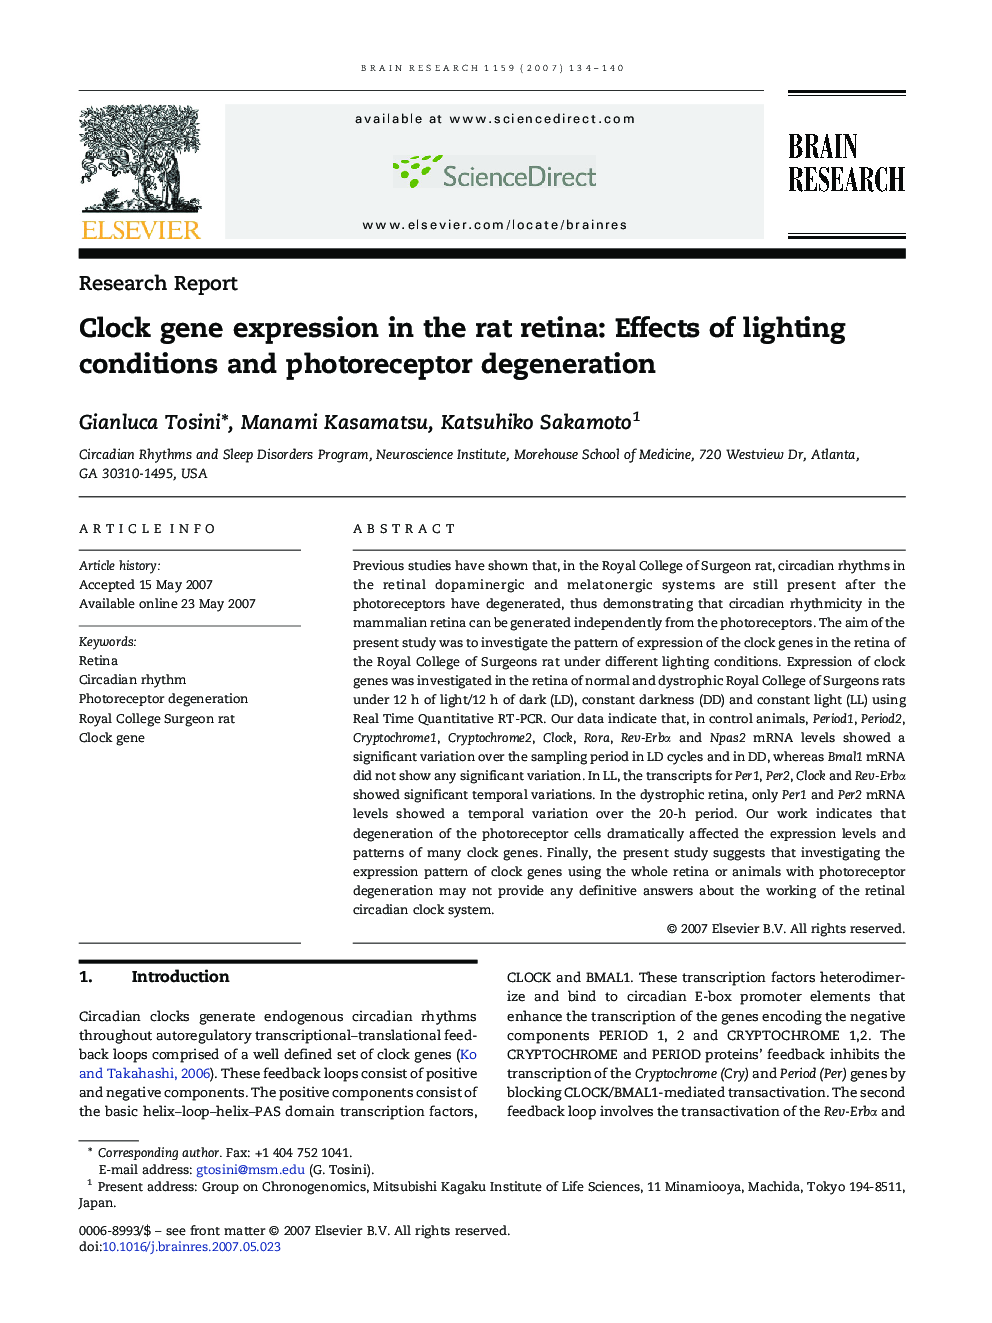 Clock gene expression in the rat retina: Effects of lighting conditions and photoreceptor degeneration